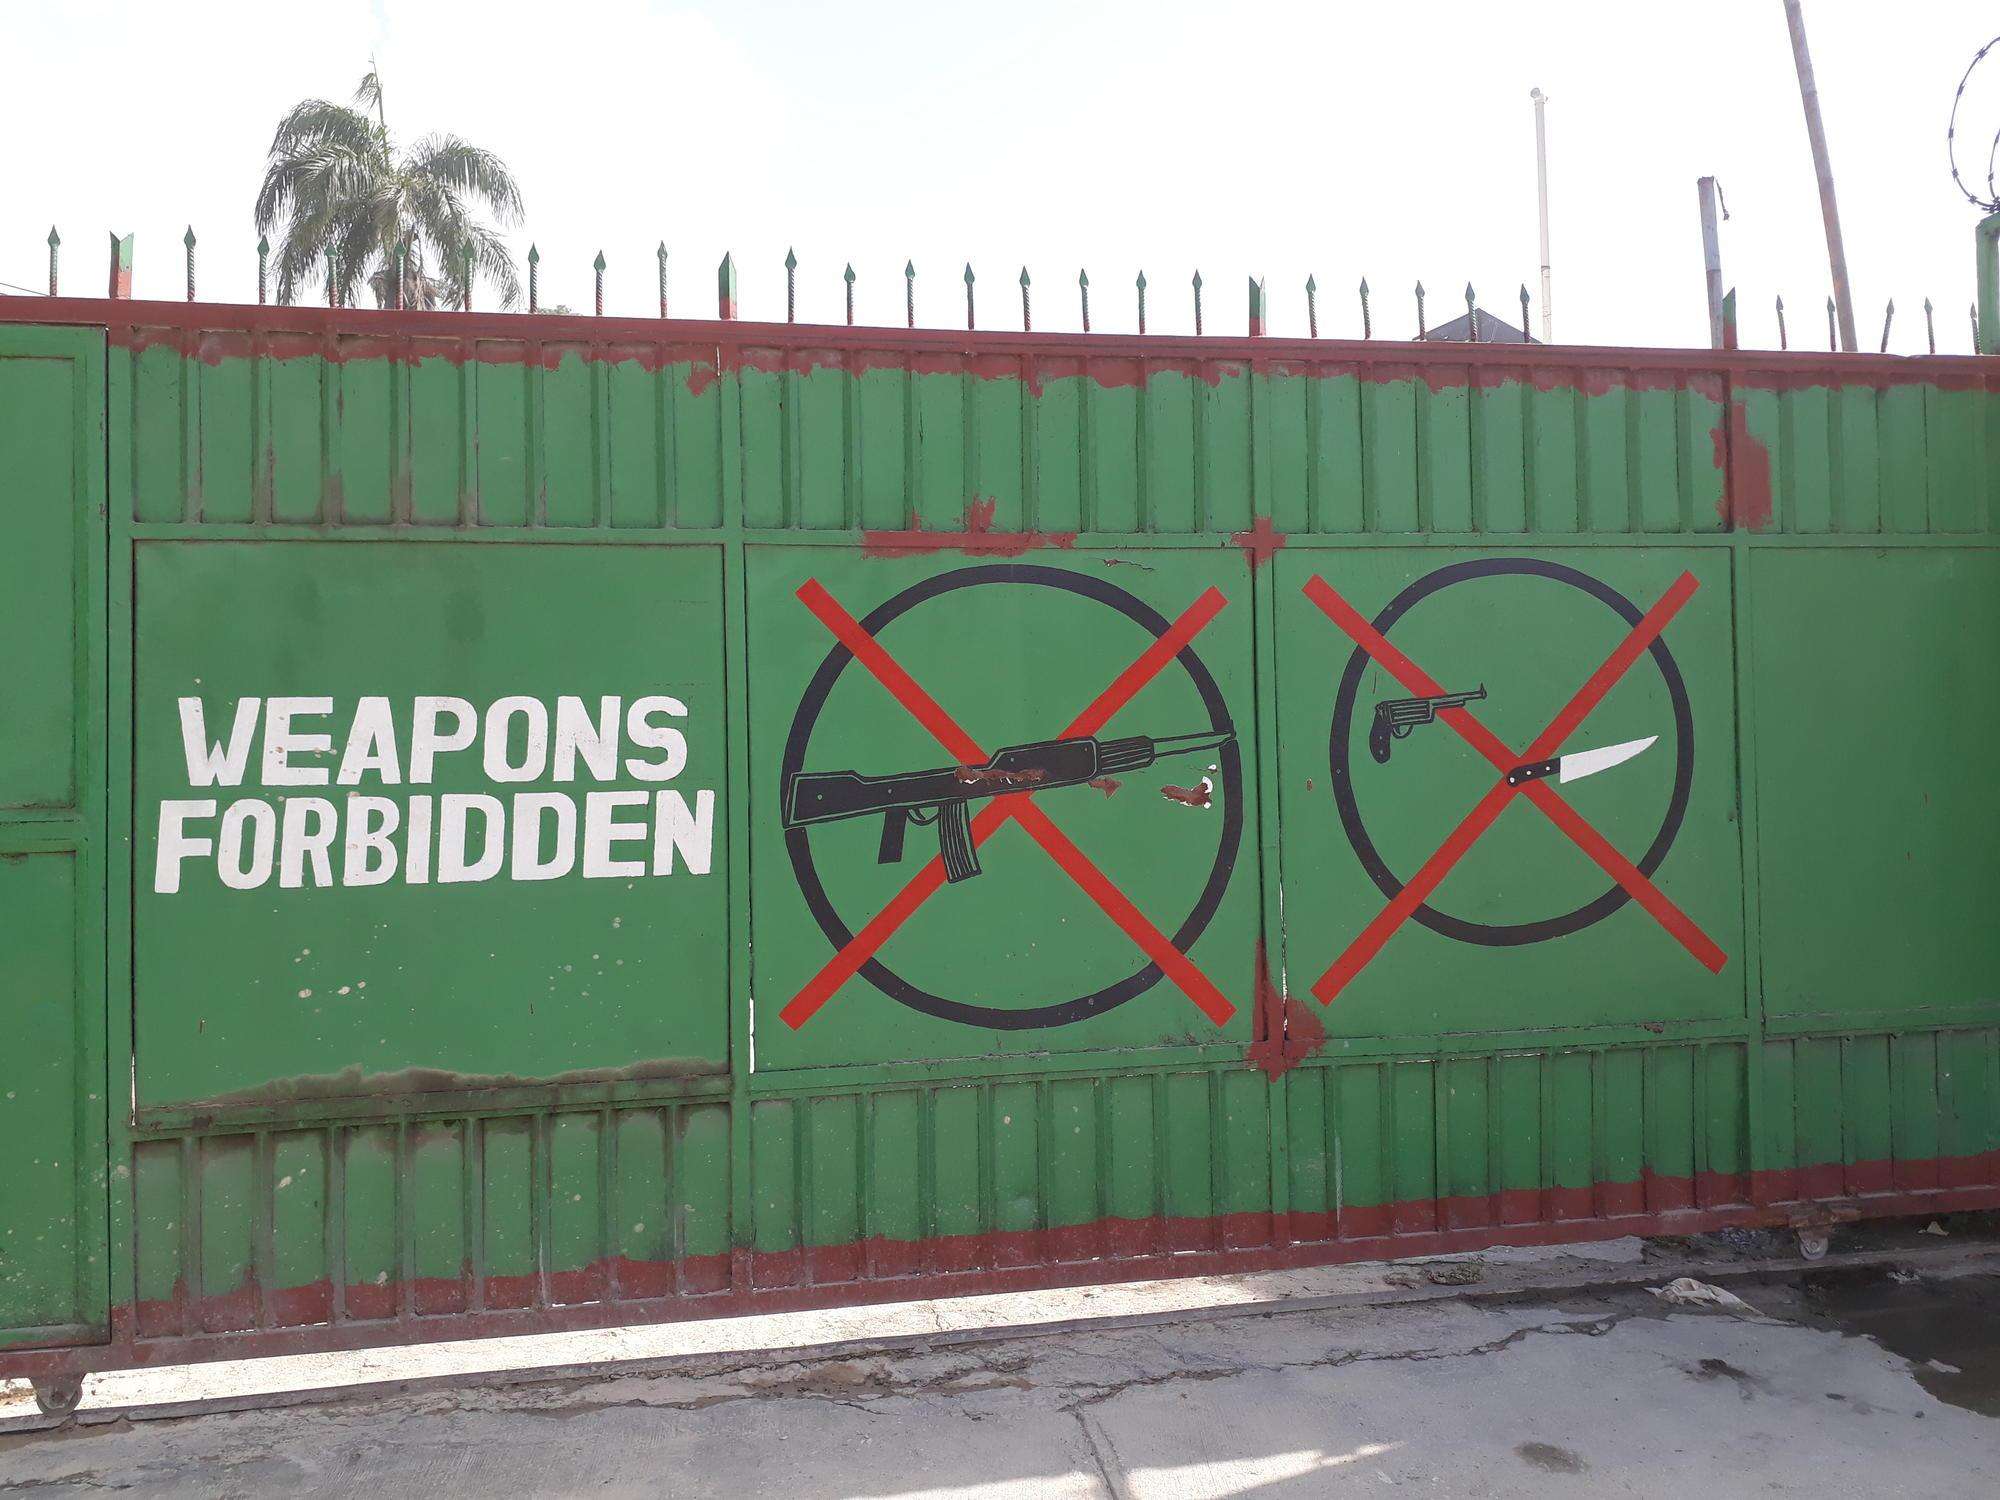 The gates of the Martissant Center in Port-au-Prince, Haiti, say "Weapons Forbidden".